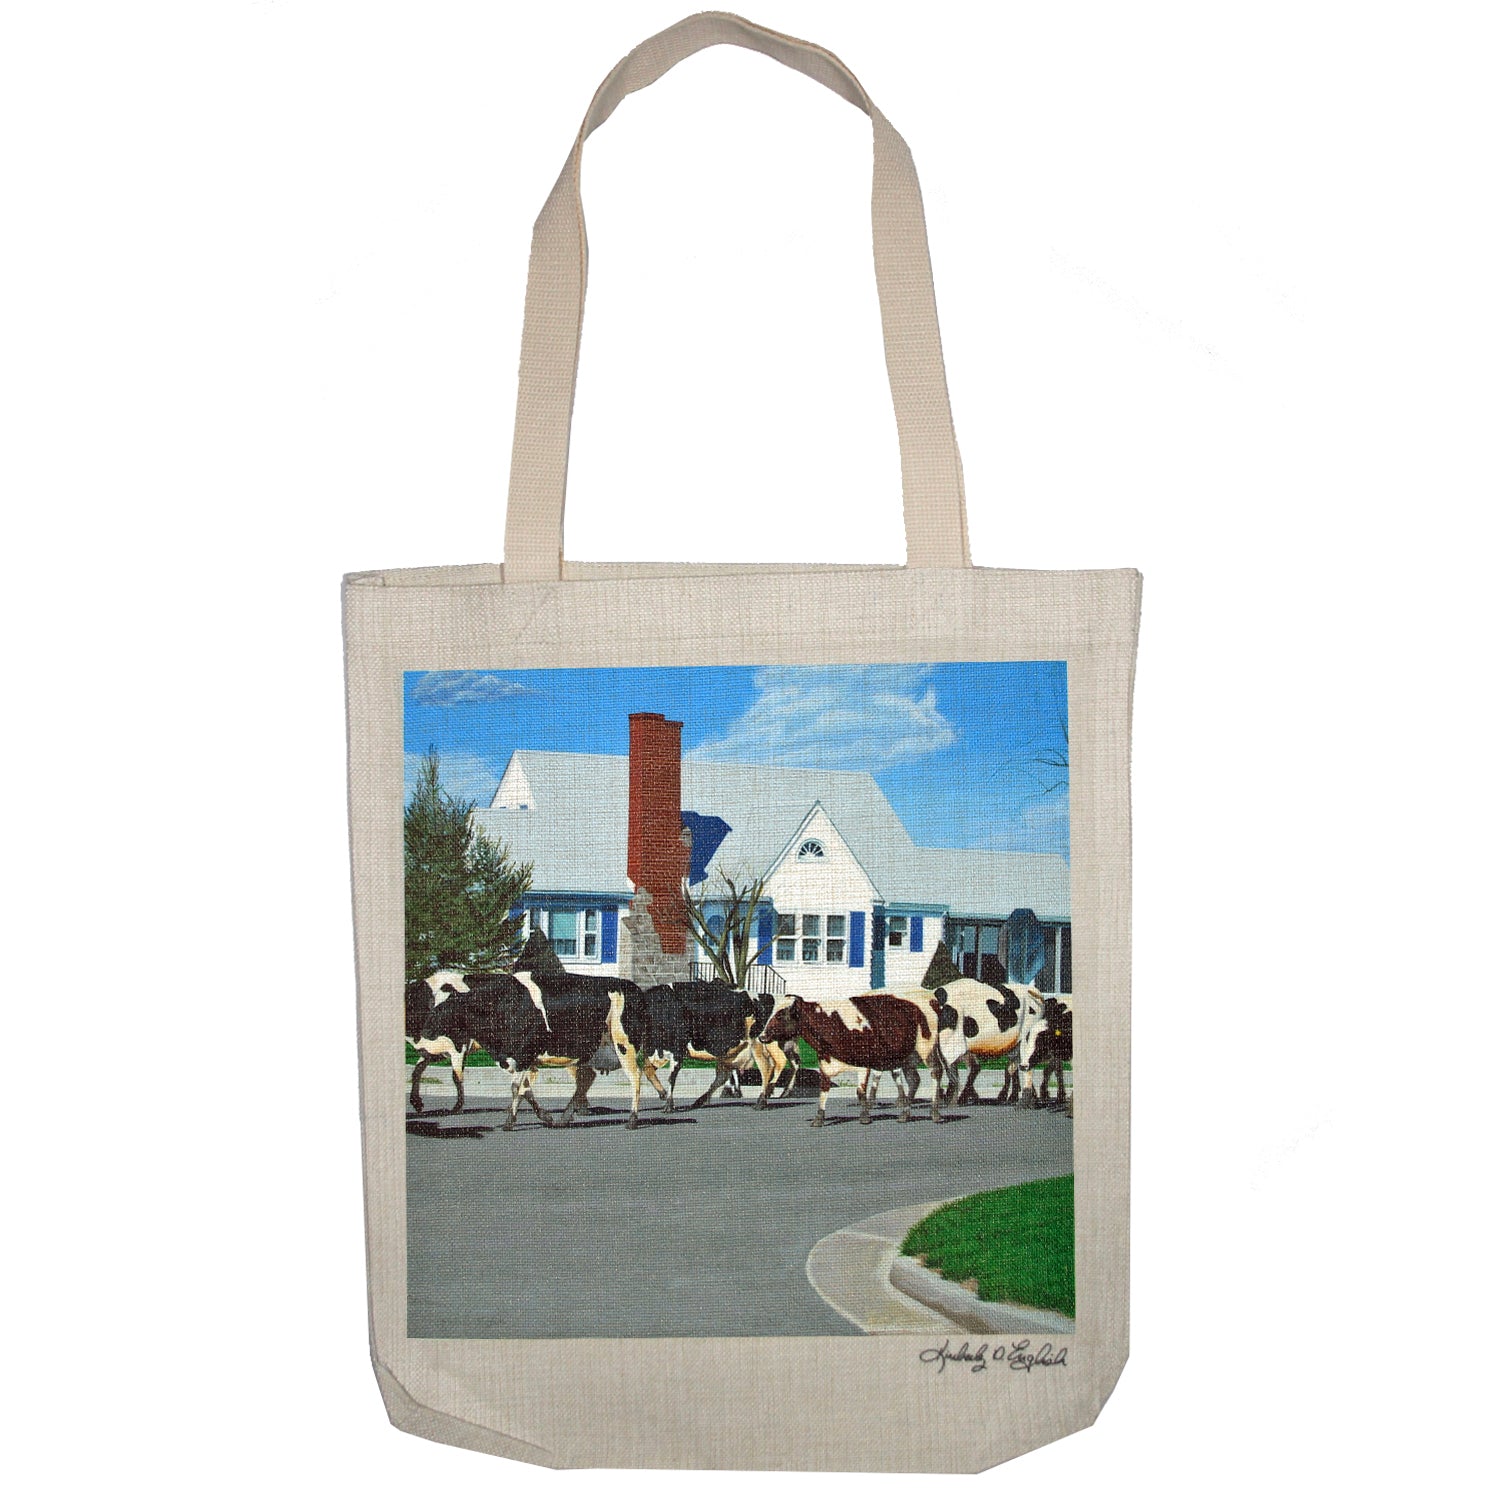 Caught in Another Country Moment Tote Bag